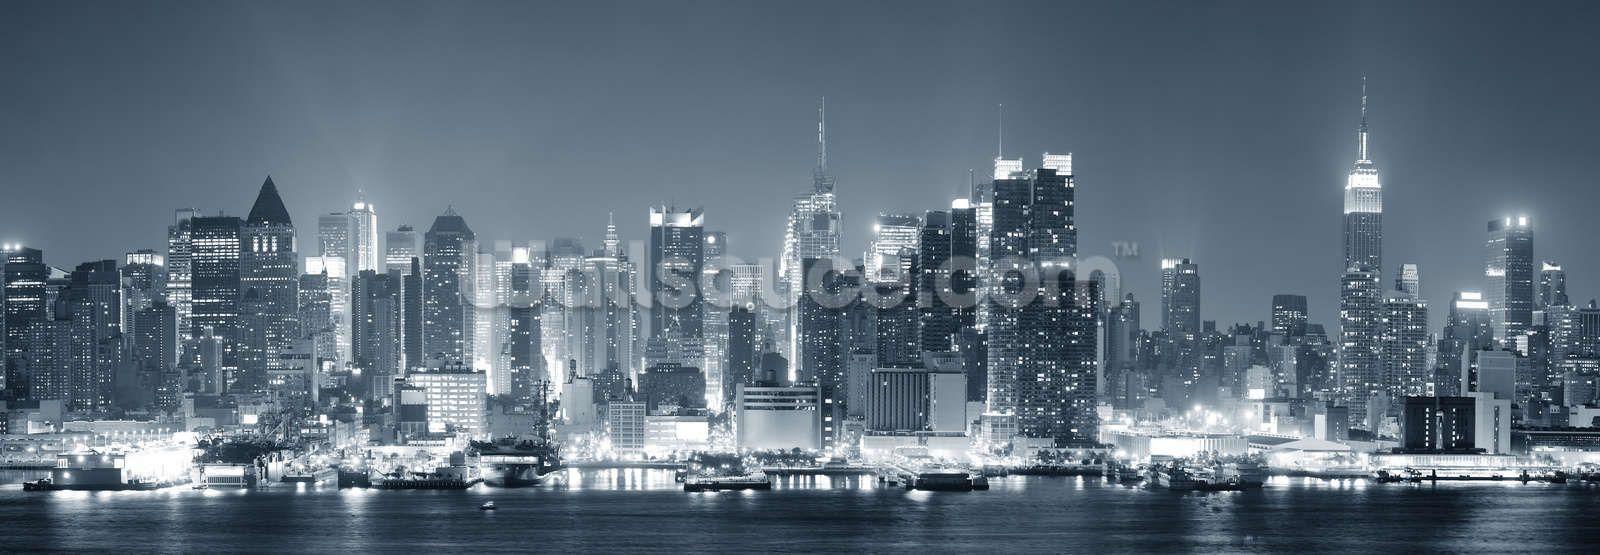 Black and White Cityscape Wallpapers - Top Free Black and White